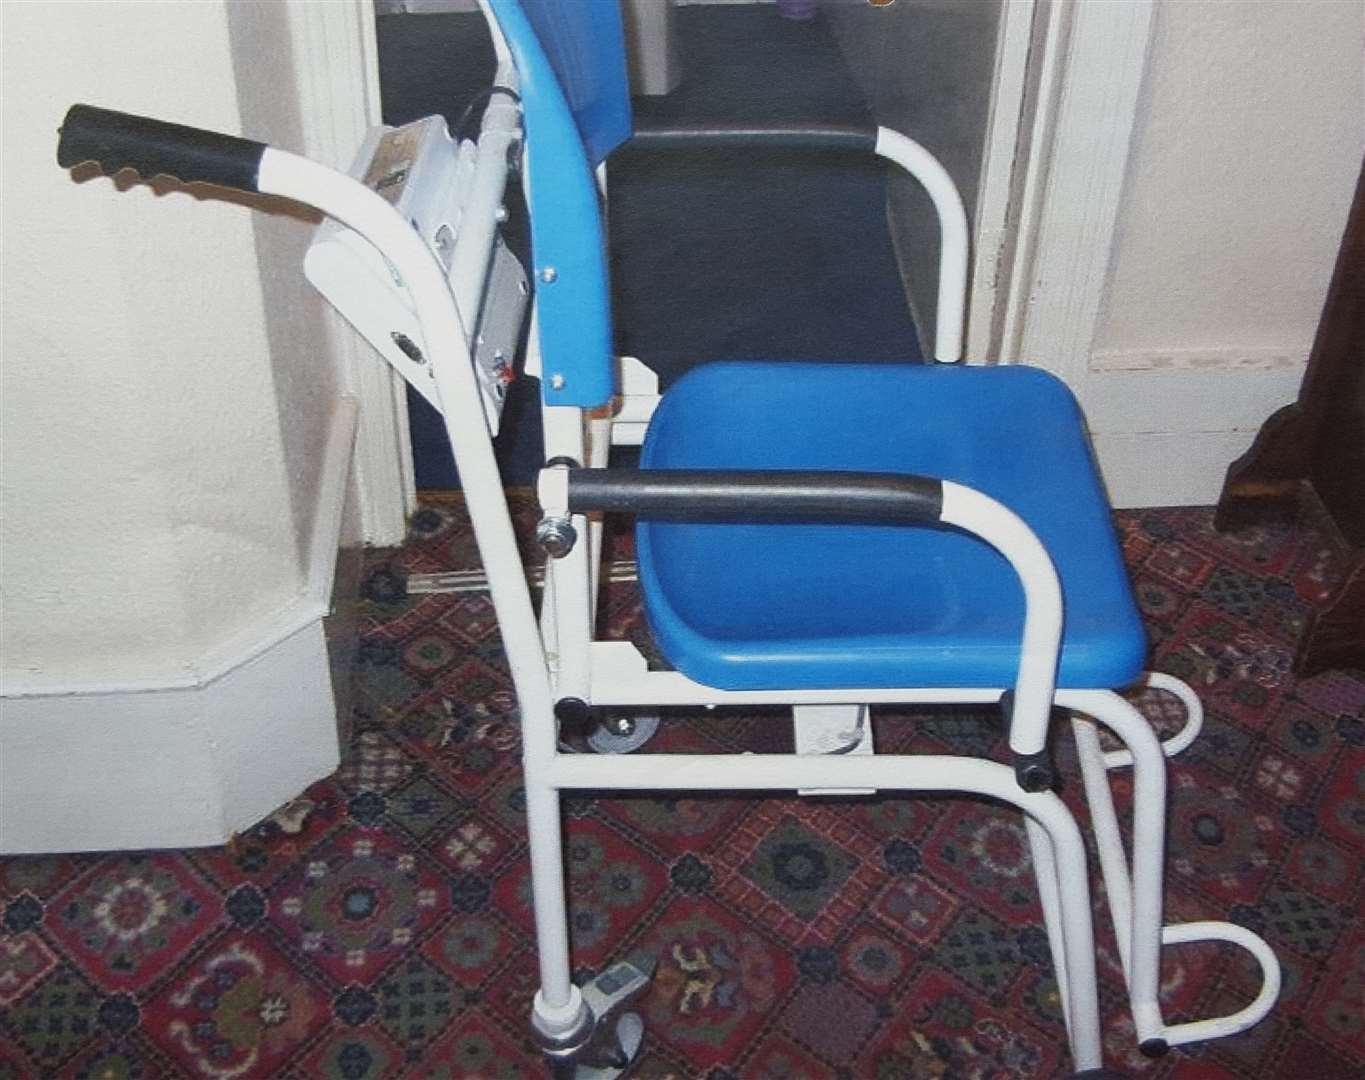 The weighing chair which trapped Joan Daws in the lift